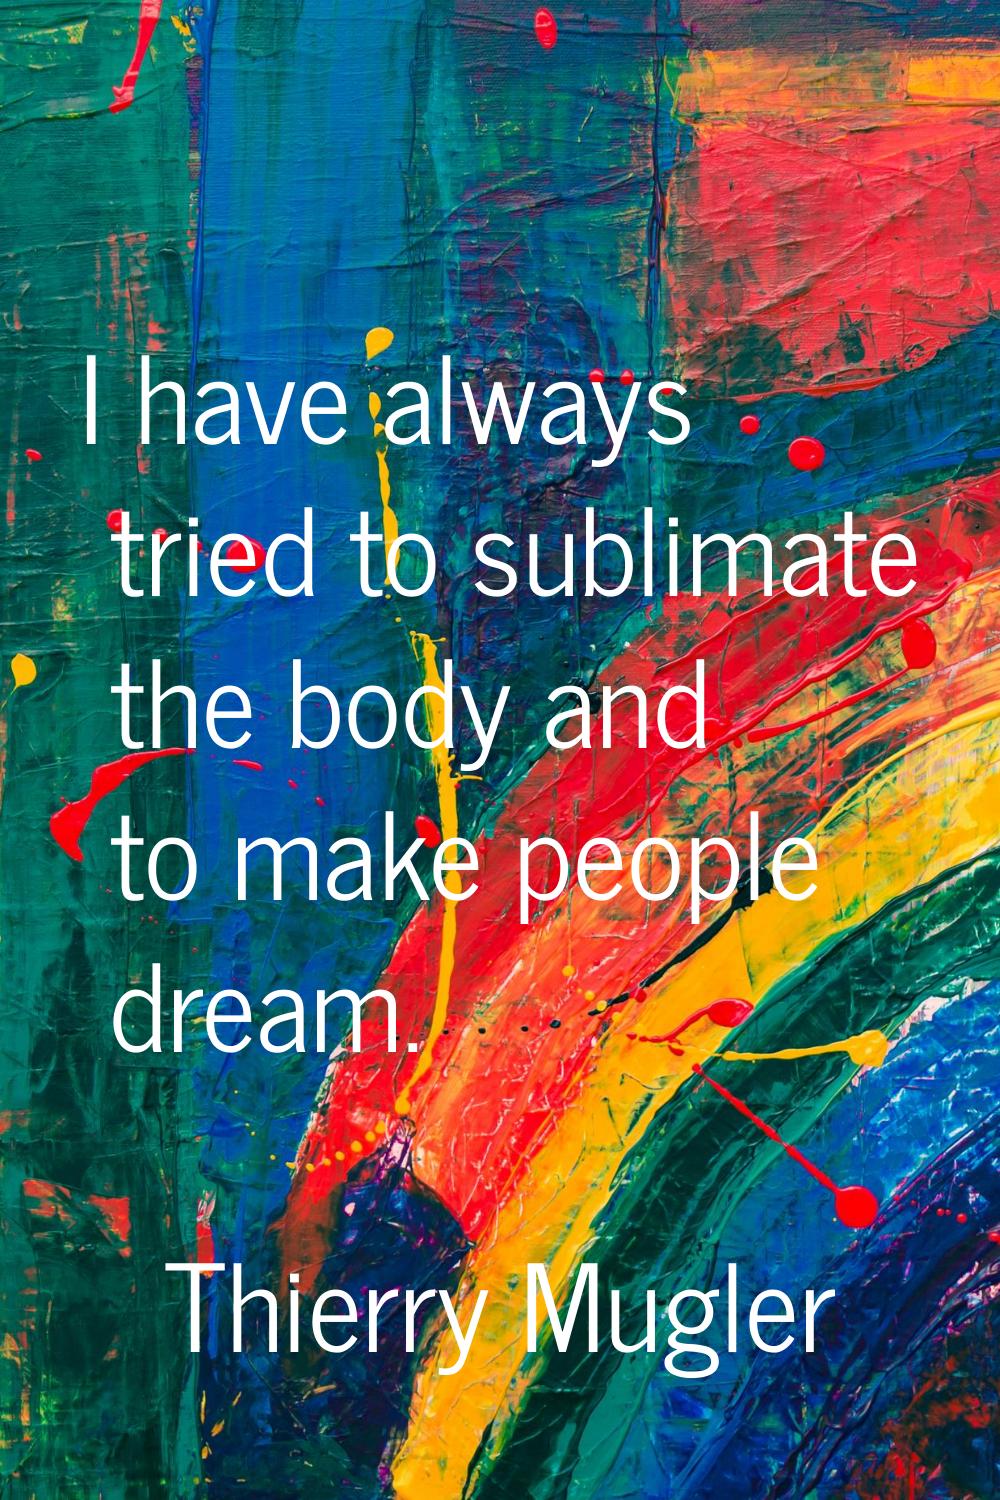 I have always tried to sublimate the body and to make people dream.